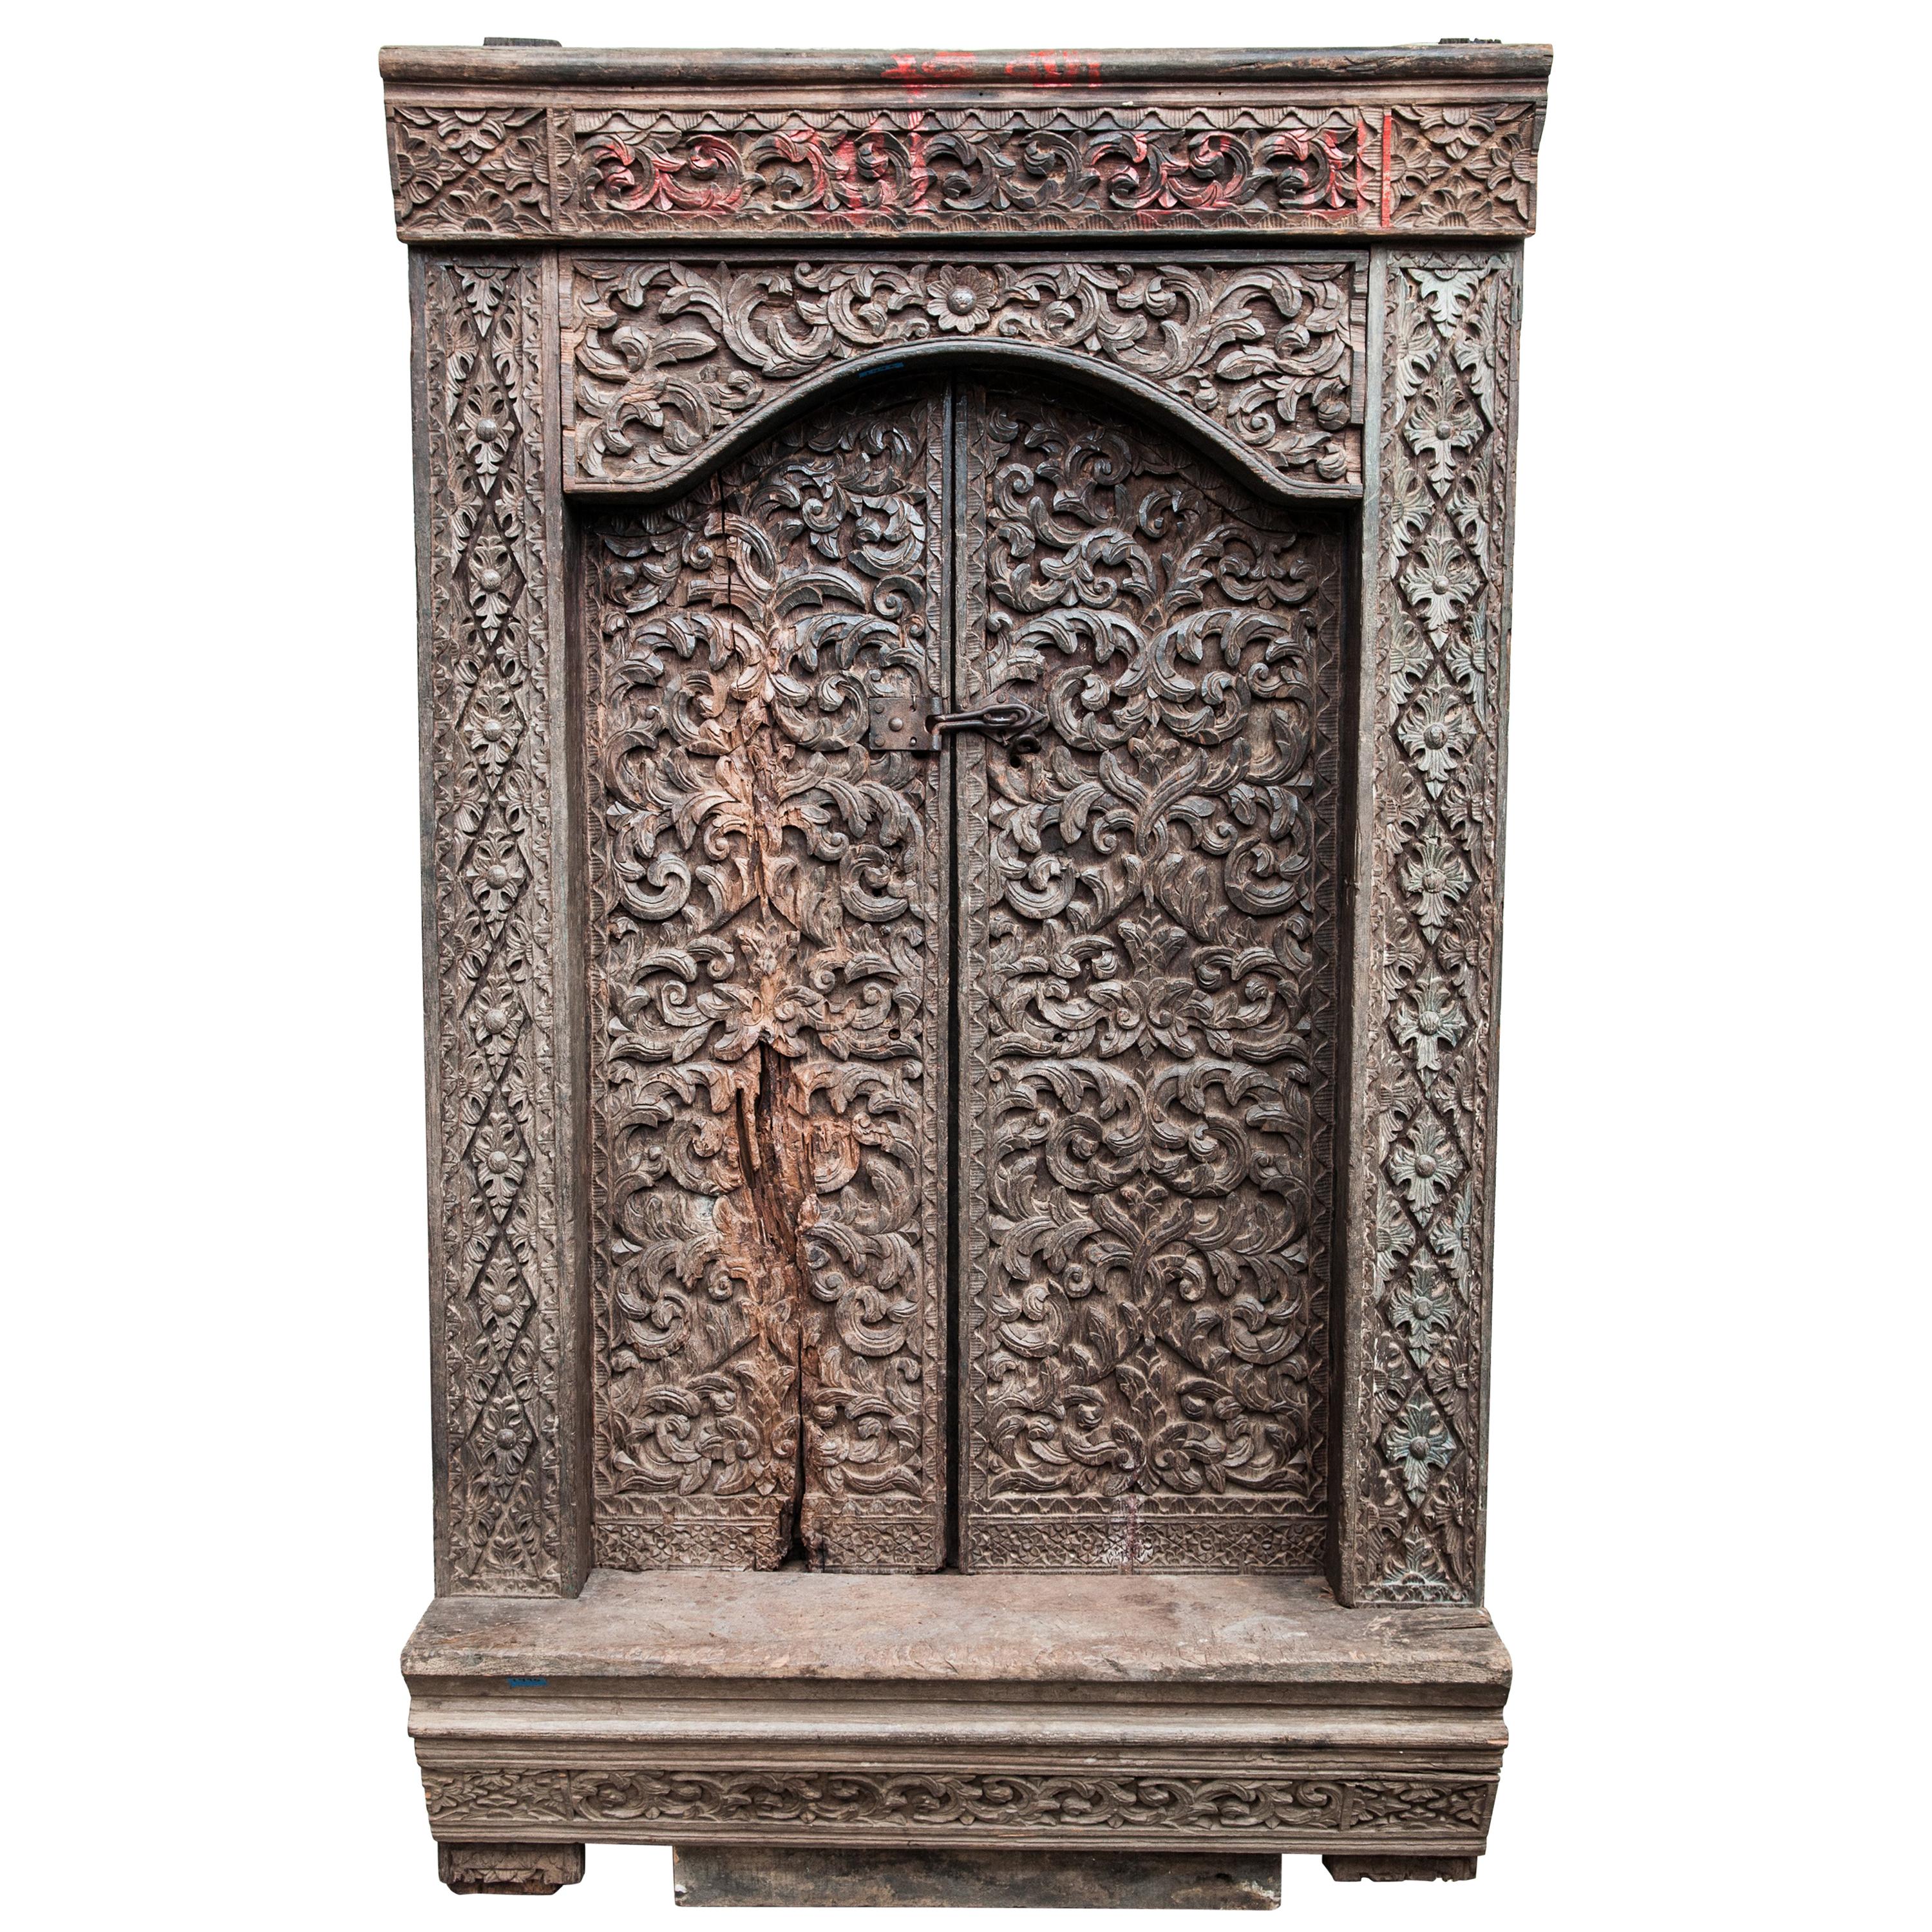 Old Carved Door and Frame from Sumatra, Merbau Wood, Early to Mid-20th Century. 